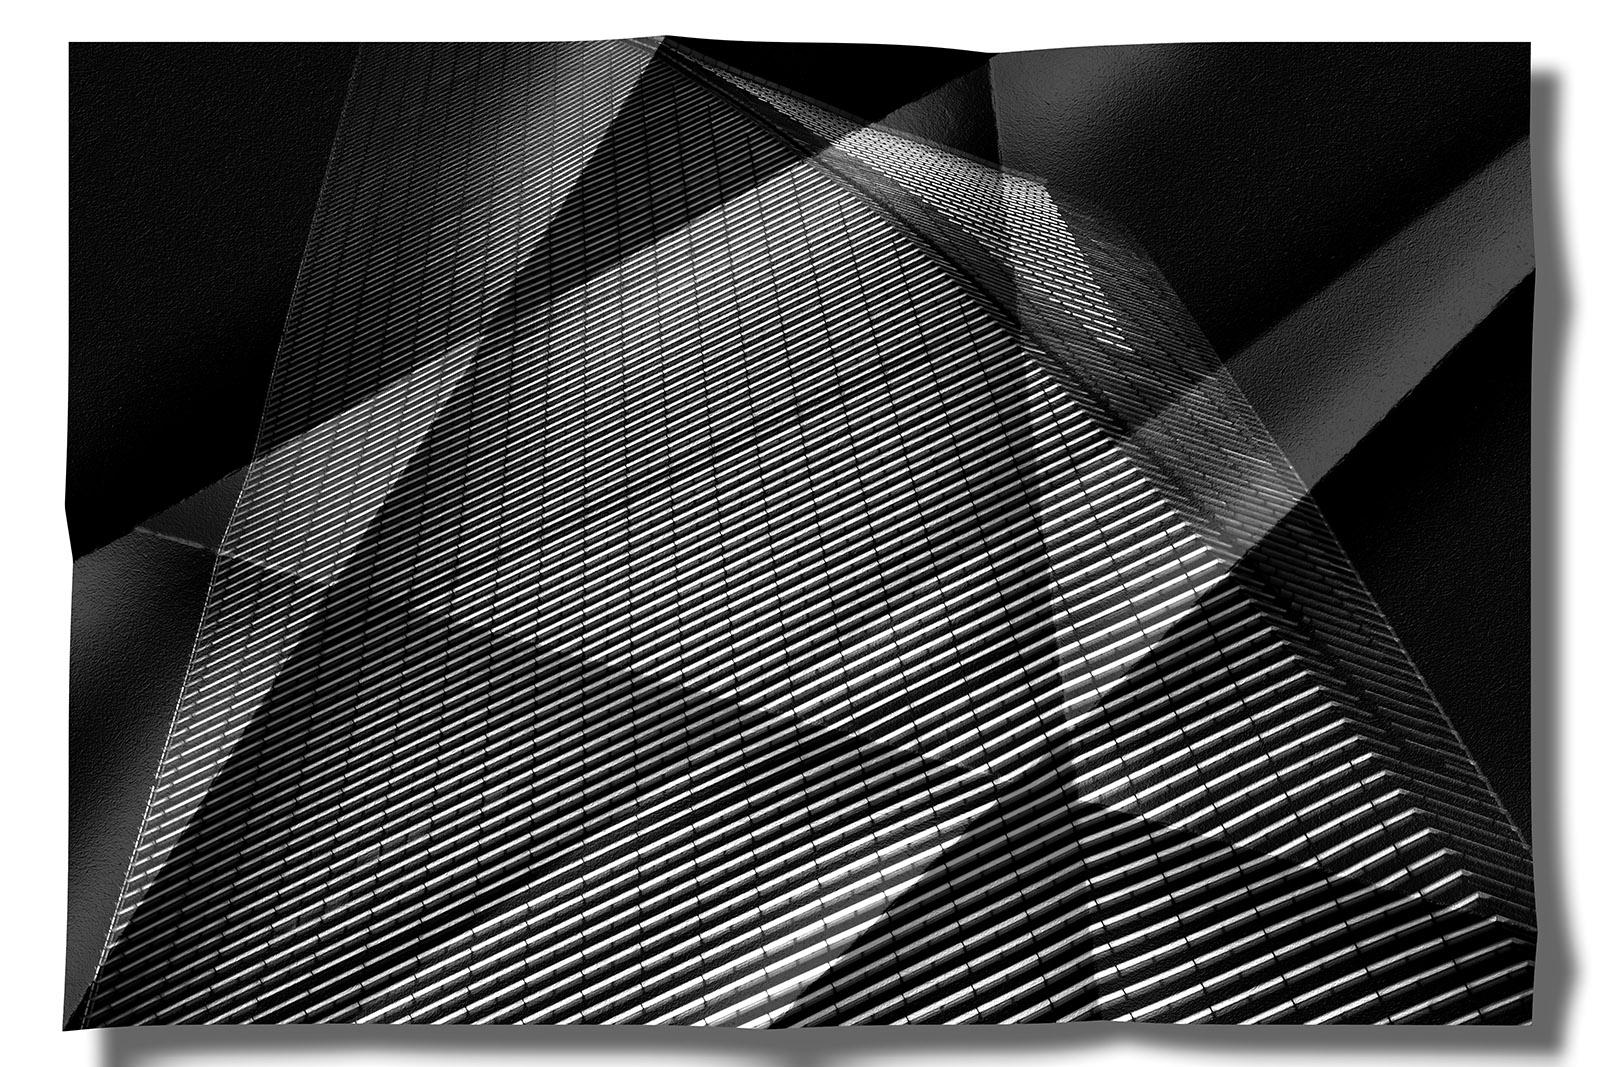 Michael Banks Black and White Photograph - Architectonic 3- Signed limited edition print, Large contemporary, Architecture